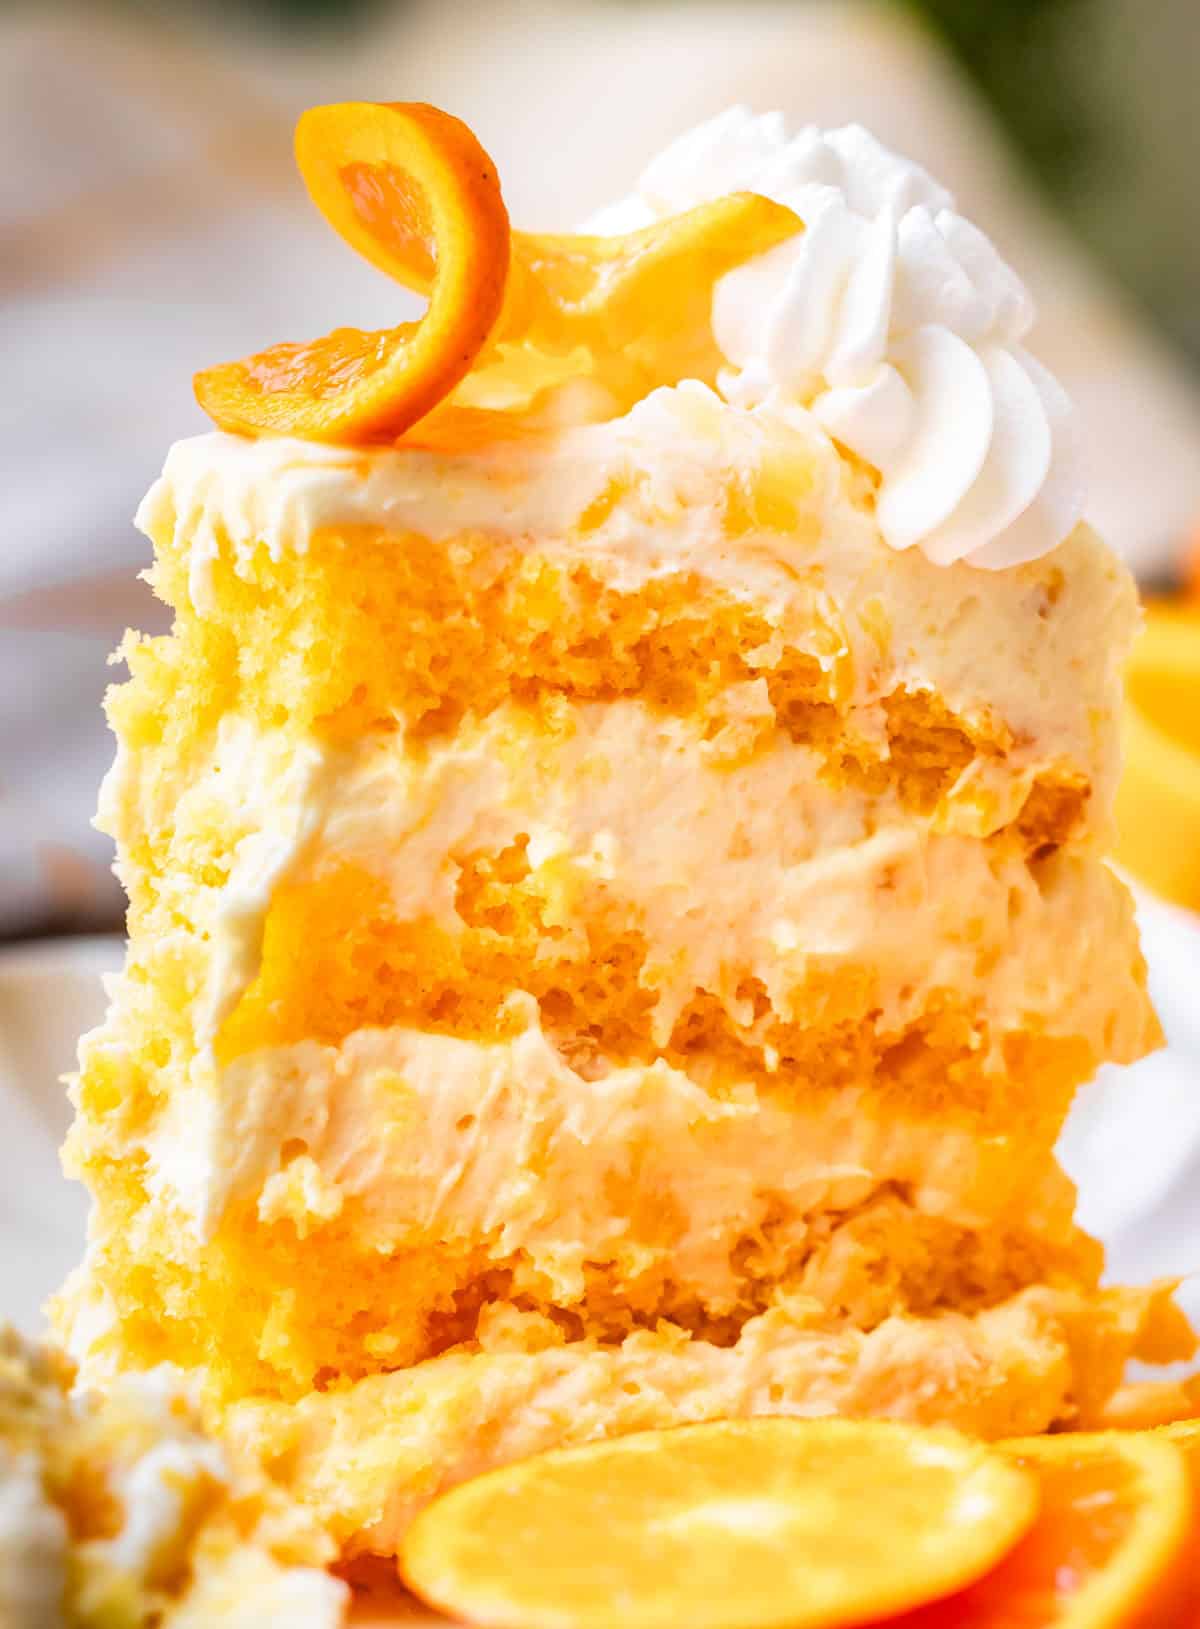 side view of a tall piece of sunshine cake with 8 layers, garnished with an orange slice.